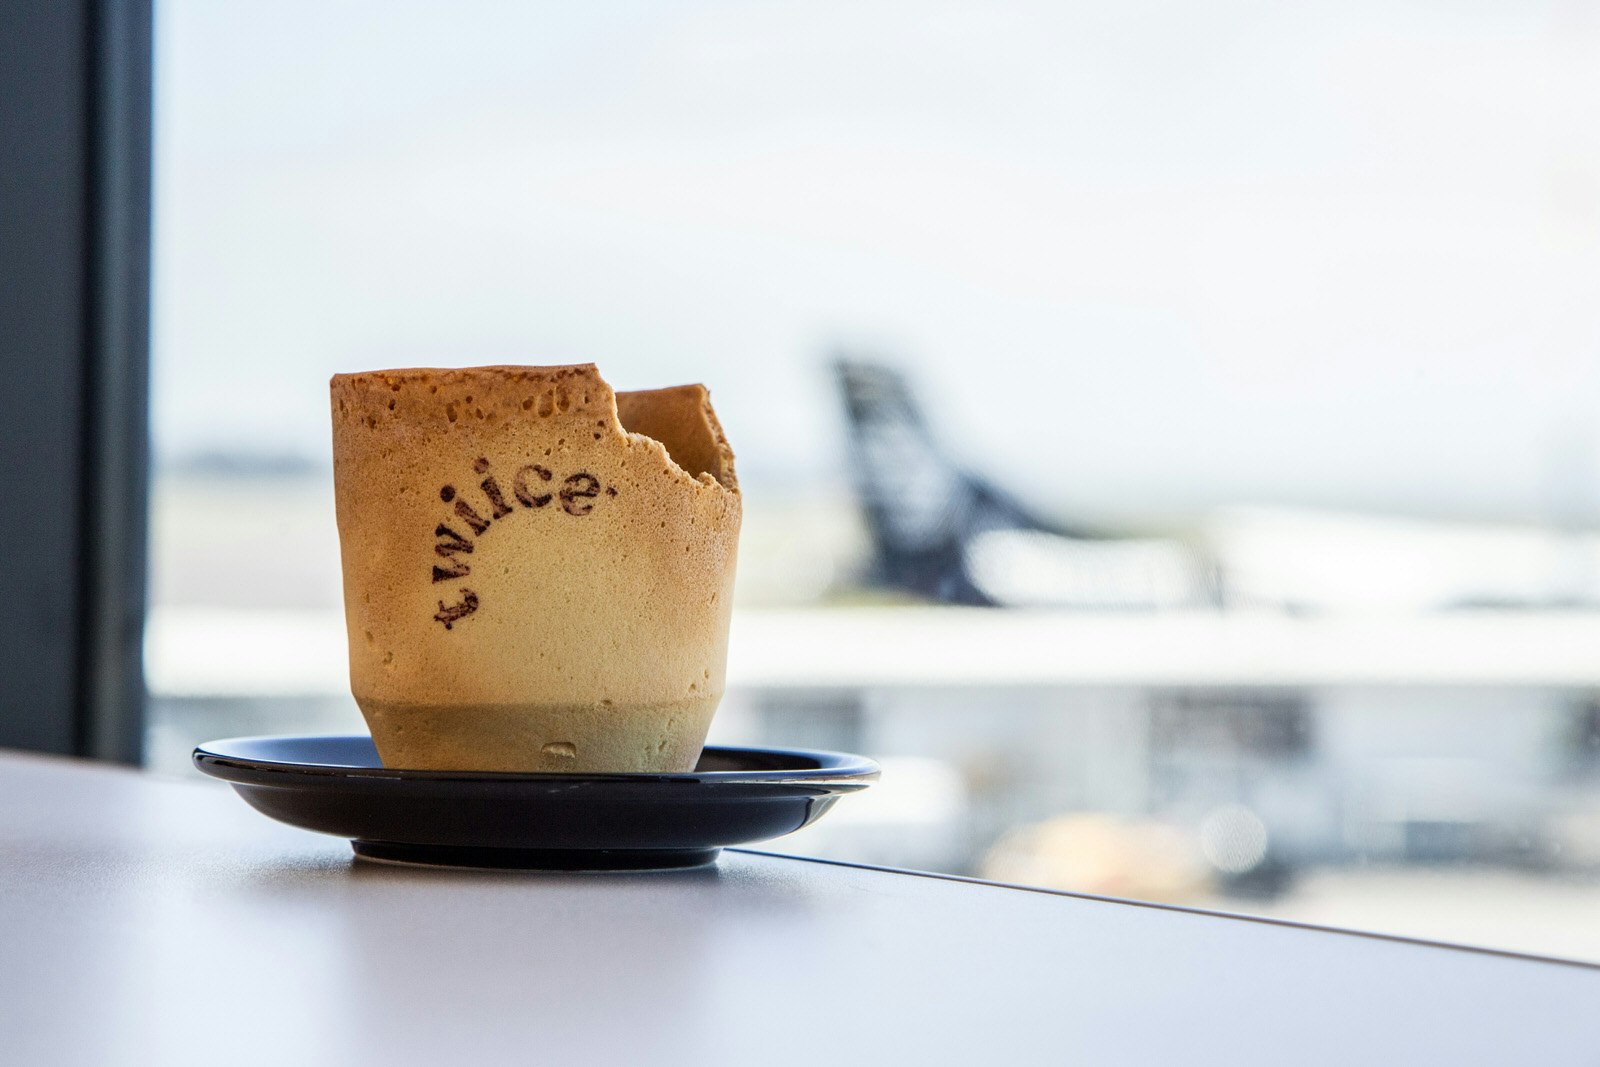 A biscuit cup with the Twiice logo sitting on a table in front of a window through which we can see and Air New Zealand aircraft